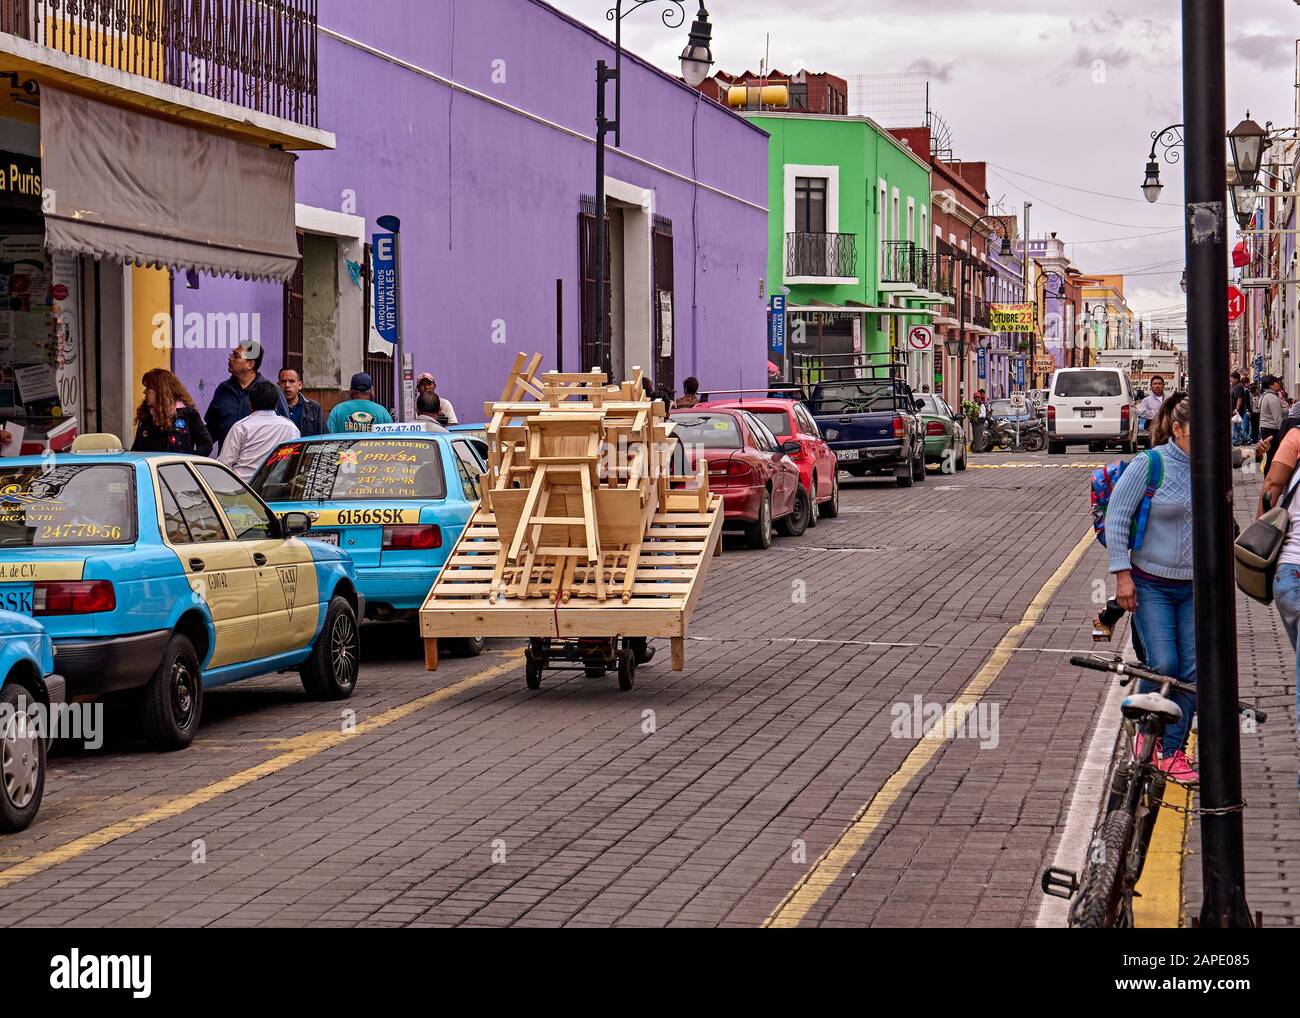 San Pedro Cholula, Mexico, October 17, 2018 - Carpenter transports furniture by hand in handcart between cars on the street of San Pedro Cholula. Stock Photo